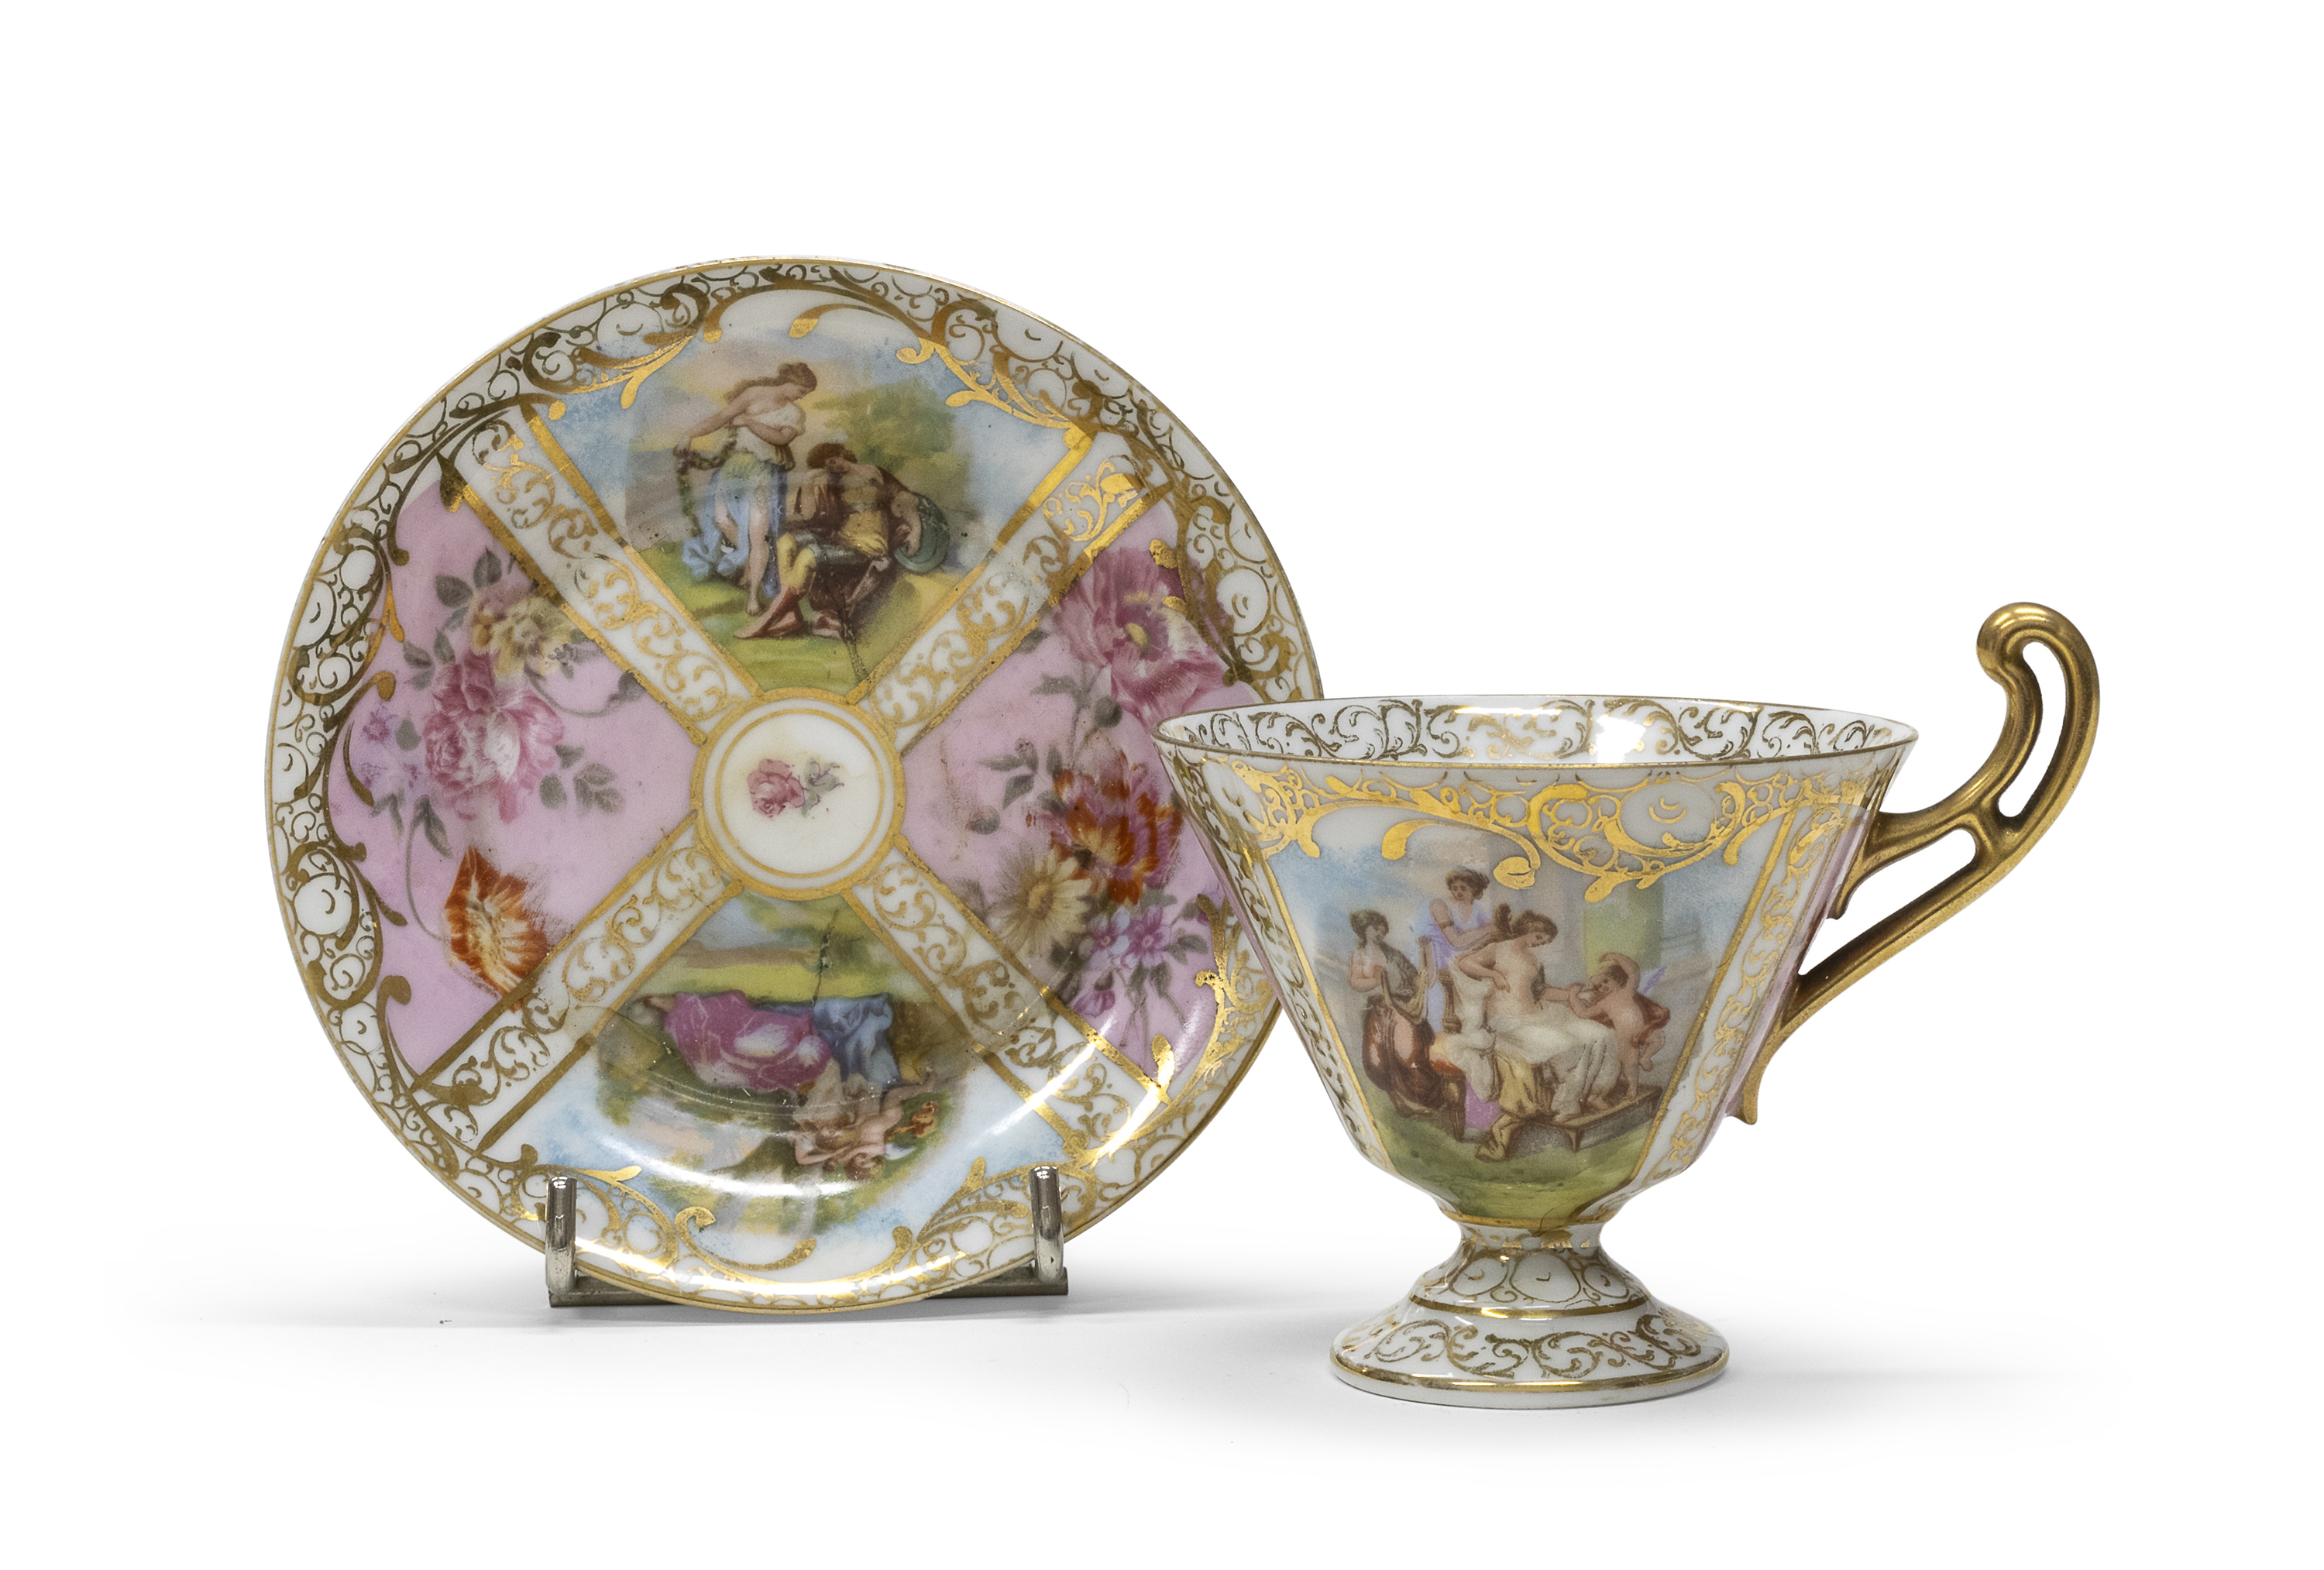 PORCELAIN CUP AND SAUCER 20TH CENTURY